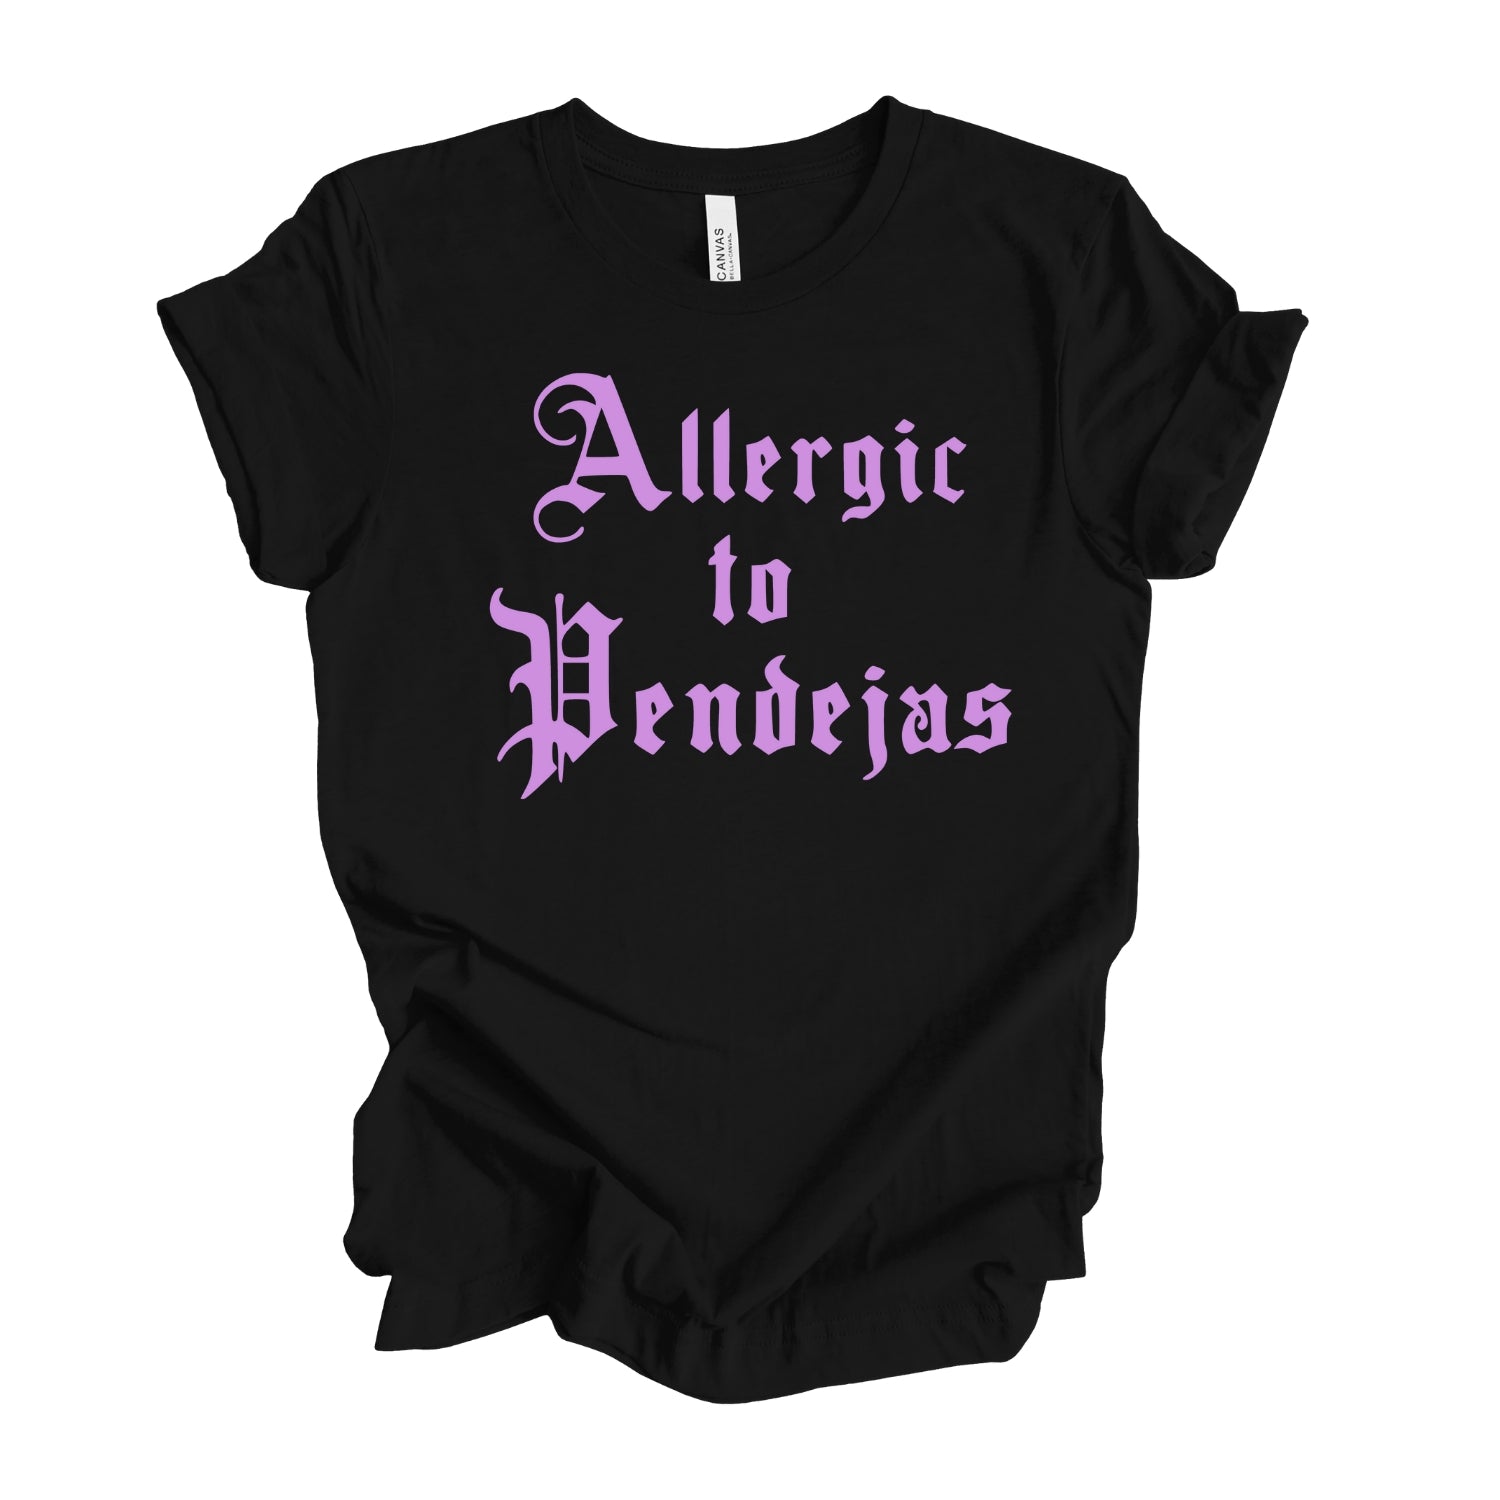 Black t-shirt with pink, cholo-style, old-english lettering that reads 'allergic to pendejas